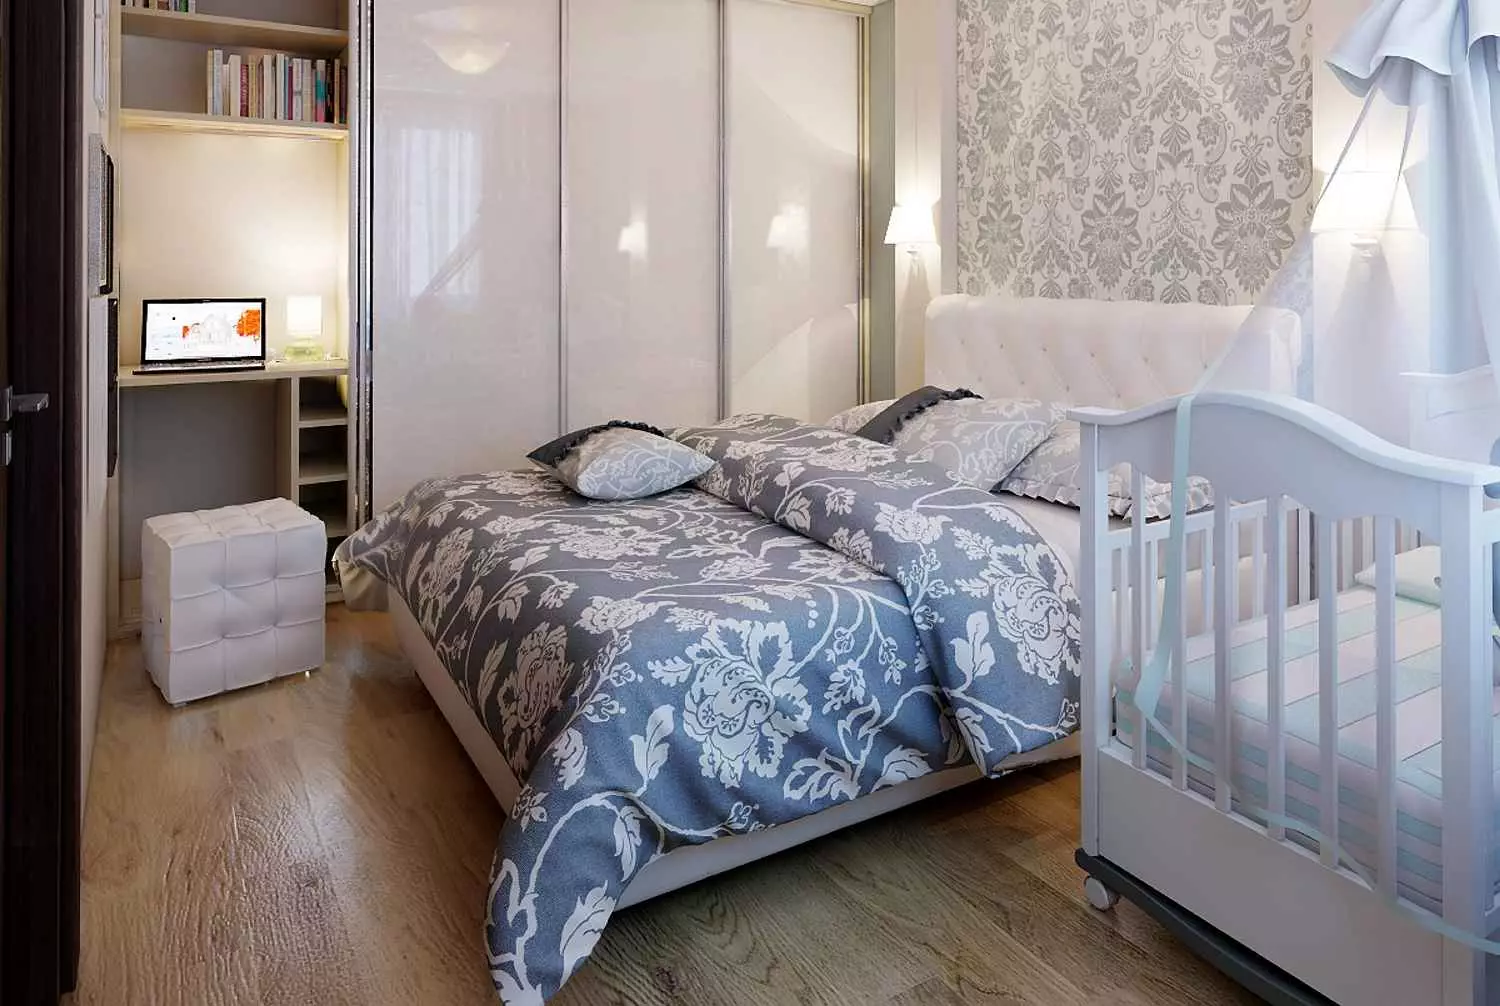 How to zonate apartment studio to the birth of a baby?